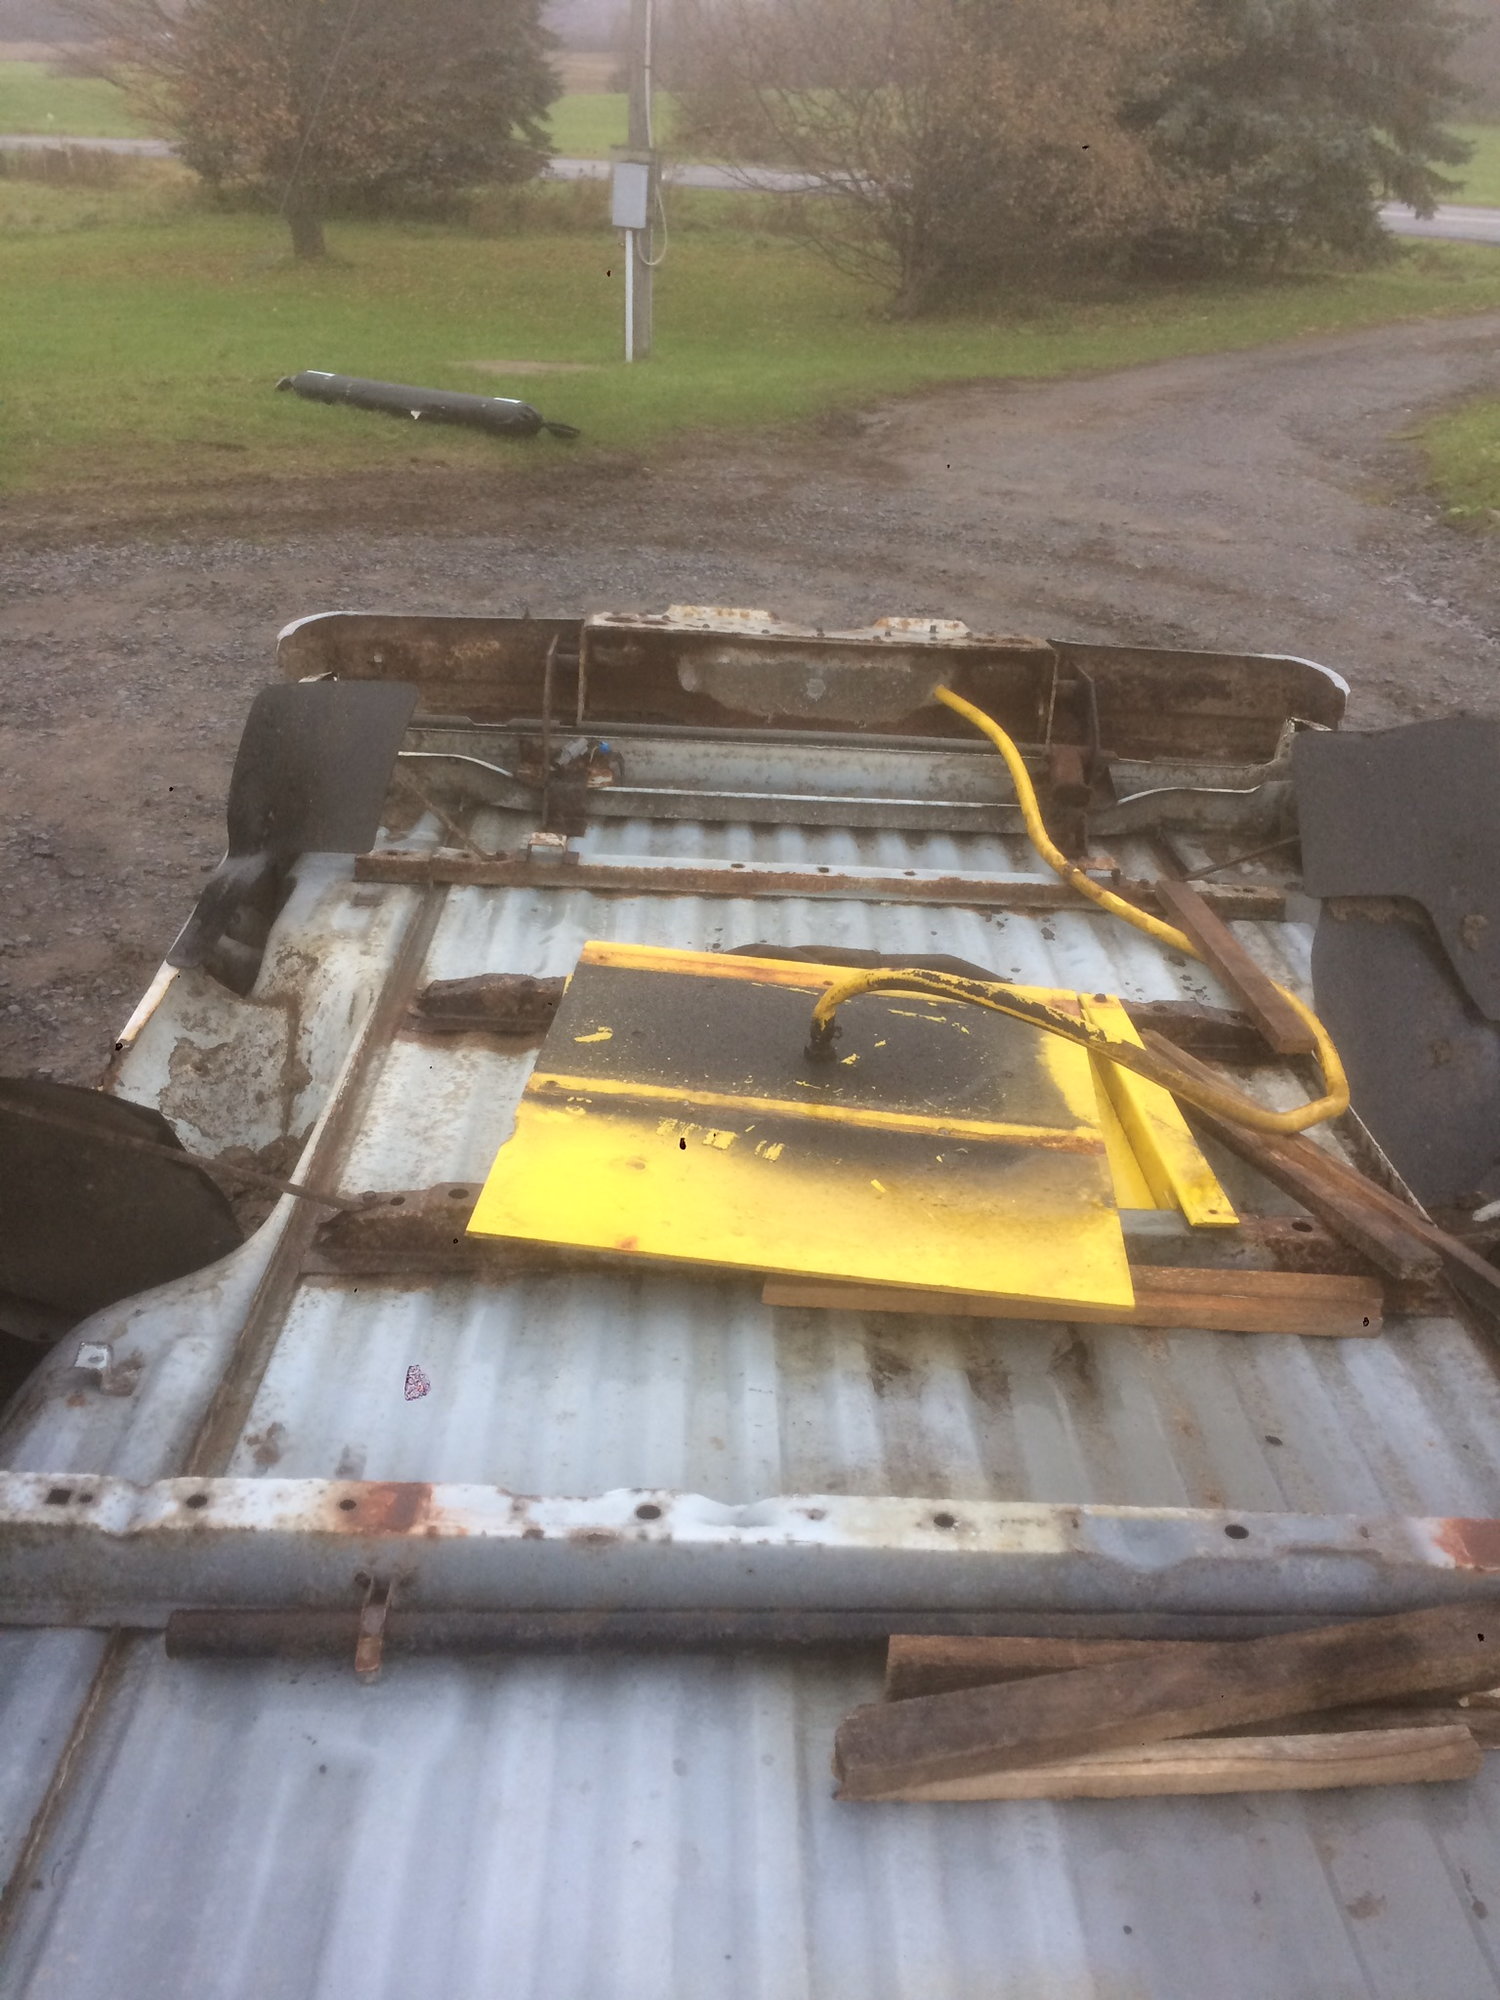 Miscellaneous - 87-97 obs ford truck parts - Used - 1987 to 1997 Ford 1/2 Ton Pickup - 1987 to 1997 Ford 3/4 Ton Pickup - Boonville, NY 13309, United States